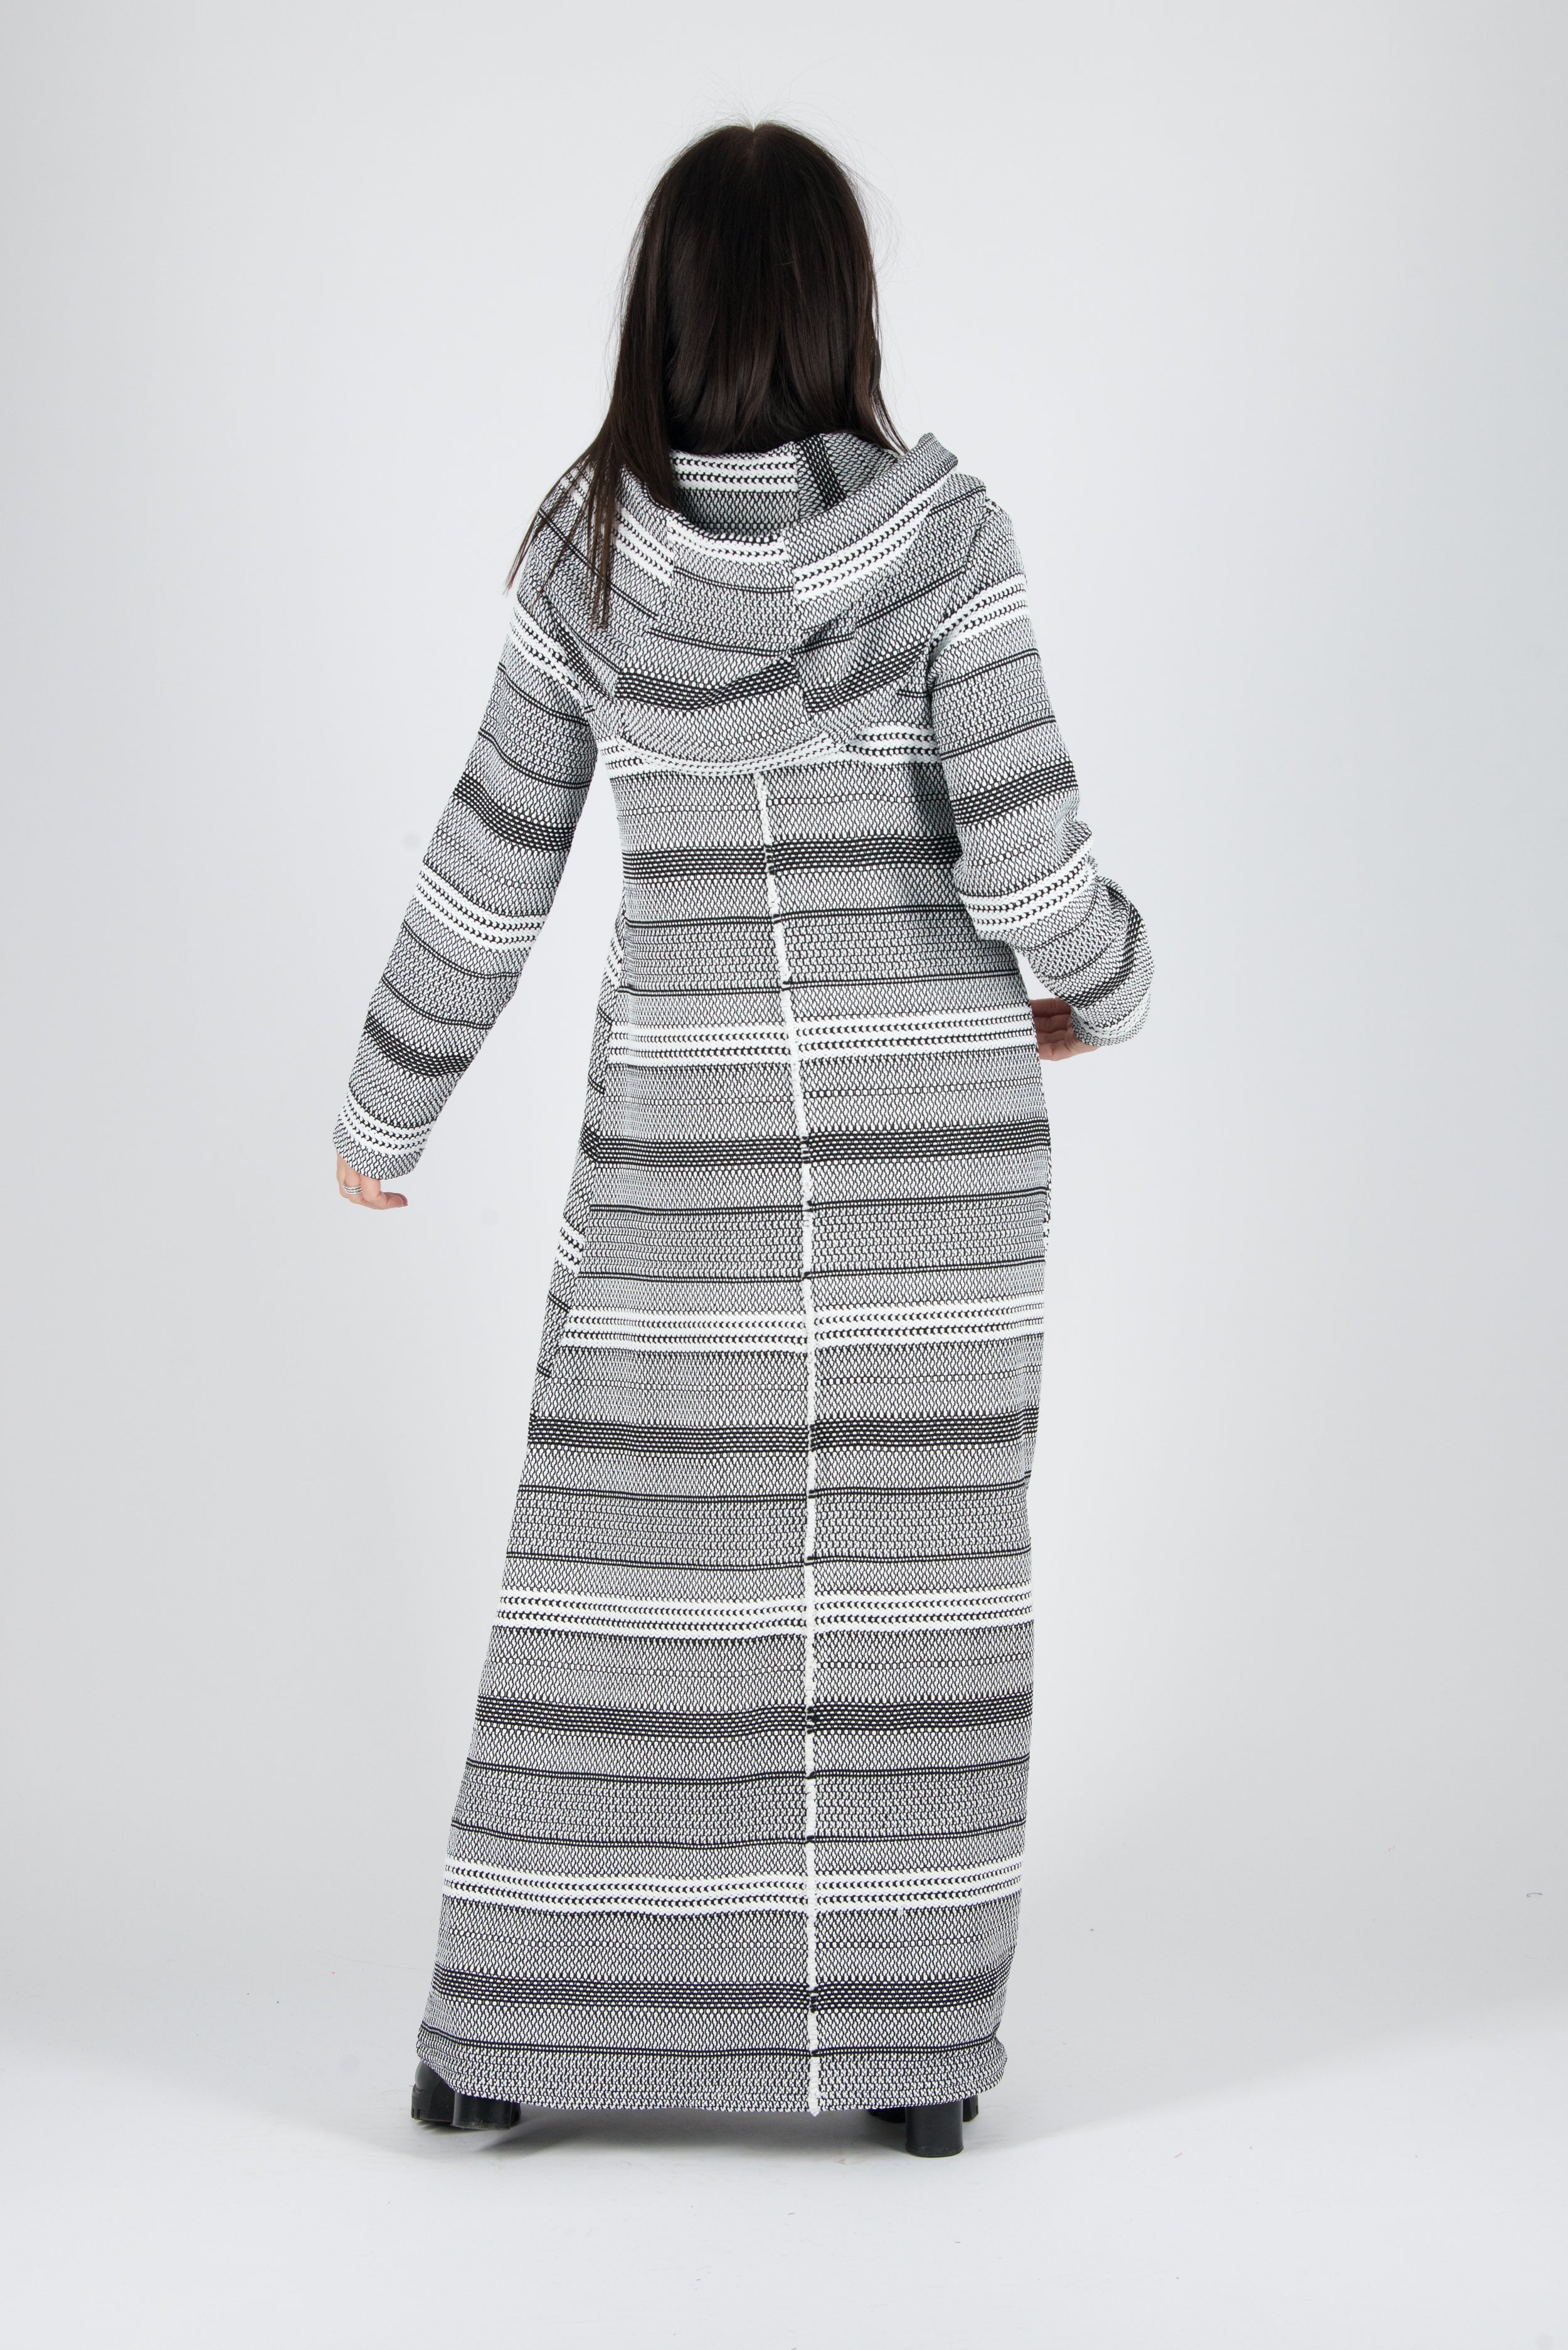 Spring Long Hooded Plus size Black and White dress, New Arrival